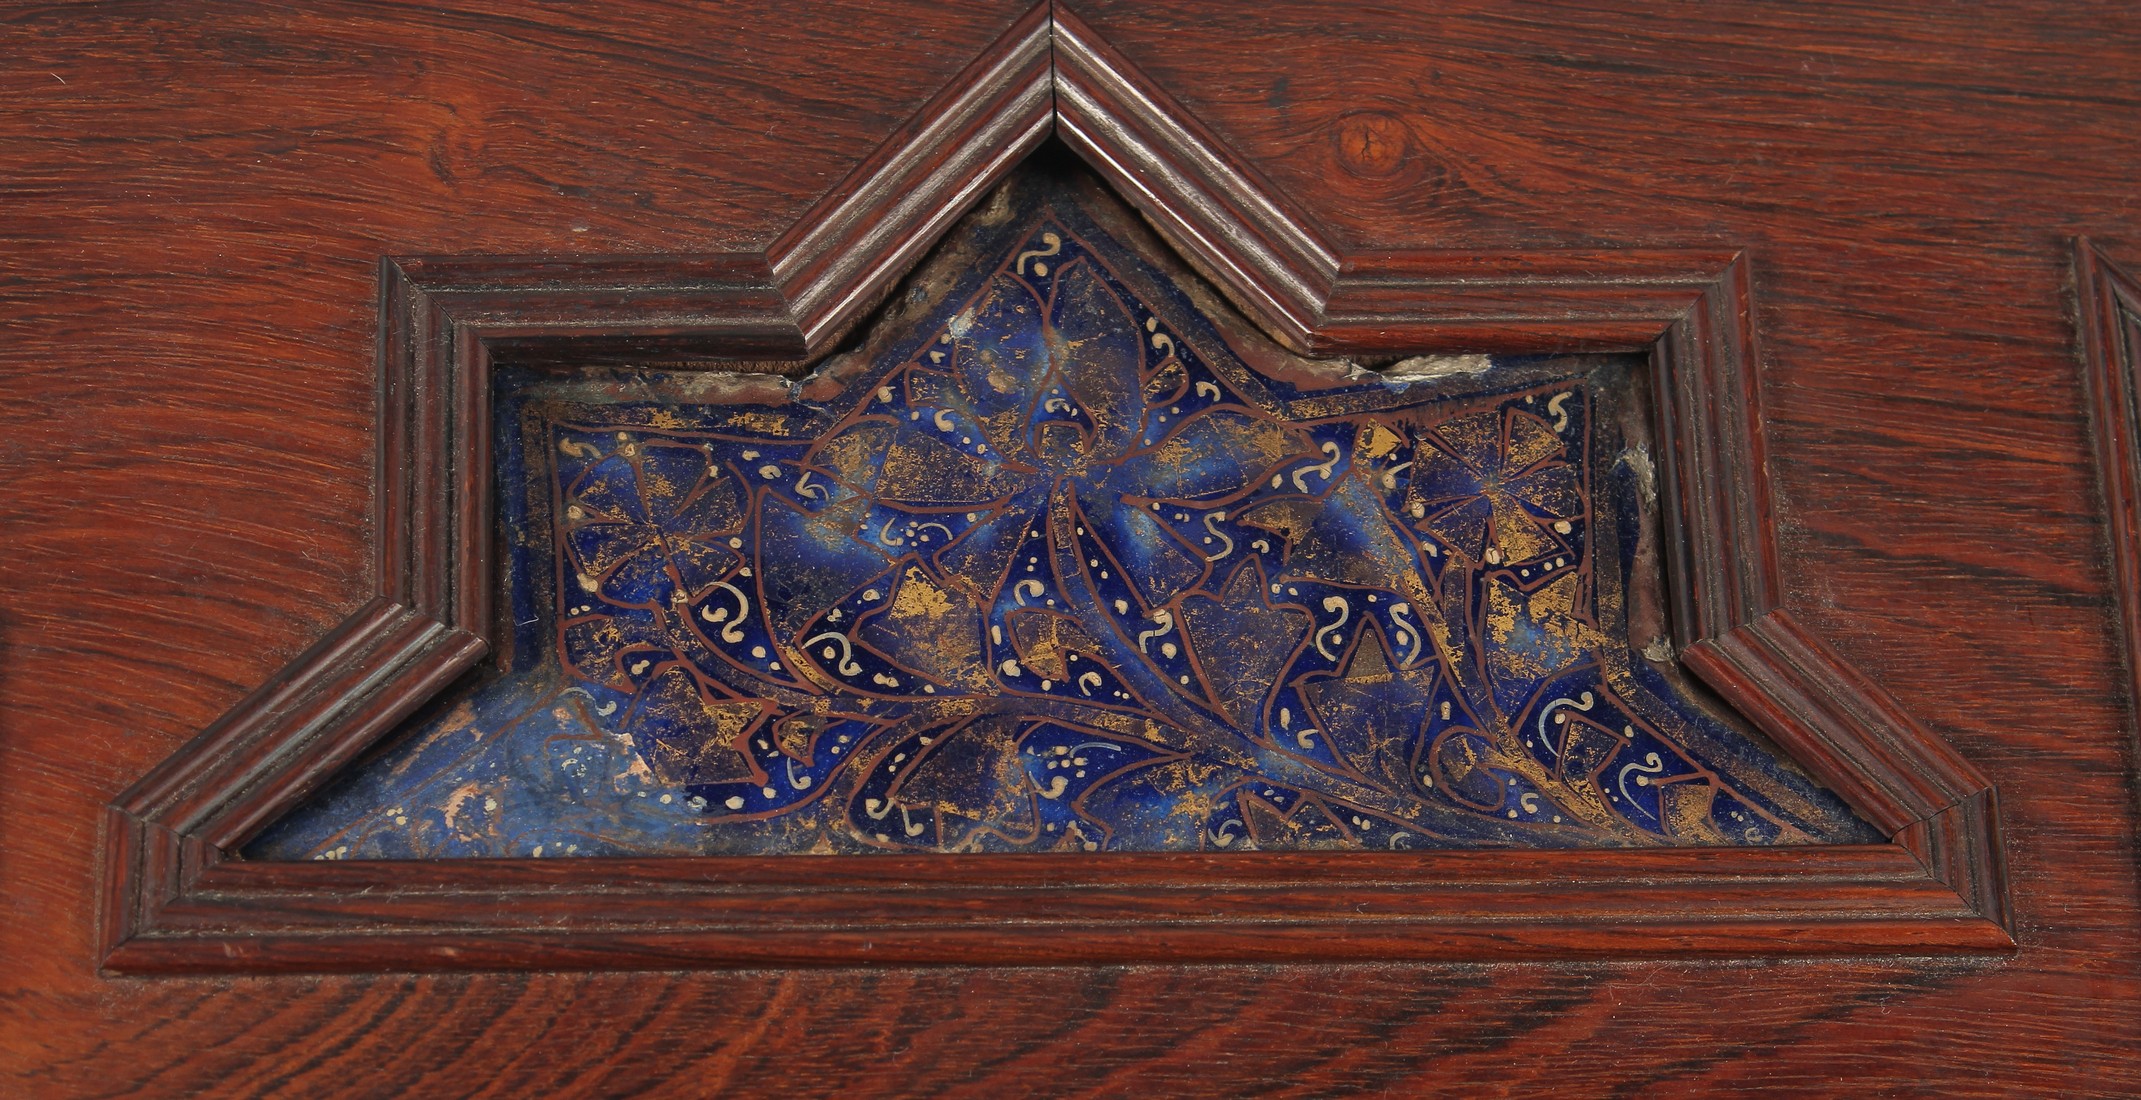 FOUR 12TH/13TH CENTURY PERSIAN LAJVARDINA AND KASHAN LUSTRE POTTERY TILES, united in a wooden frame, - Image 3 of 6